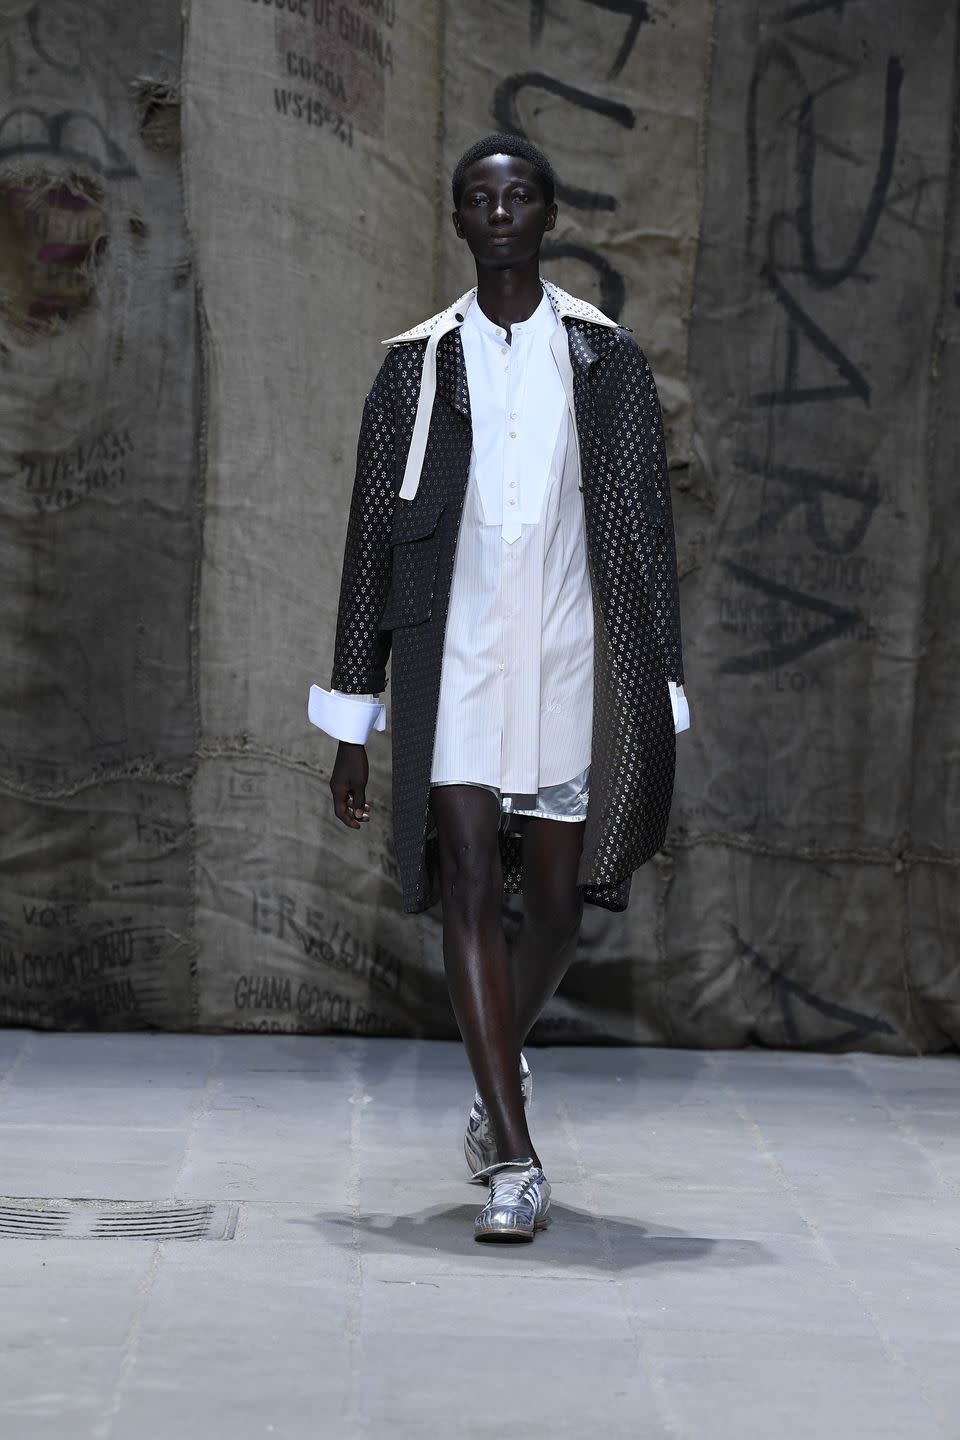 runway at wales bonner men's spring 2023 at pitti uomo photo by giovanni giannoniwwdpenske media via getty images